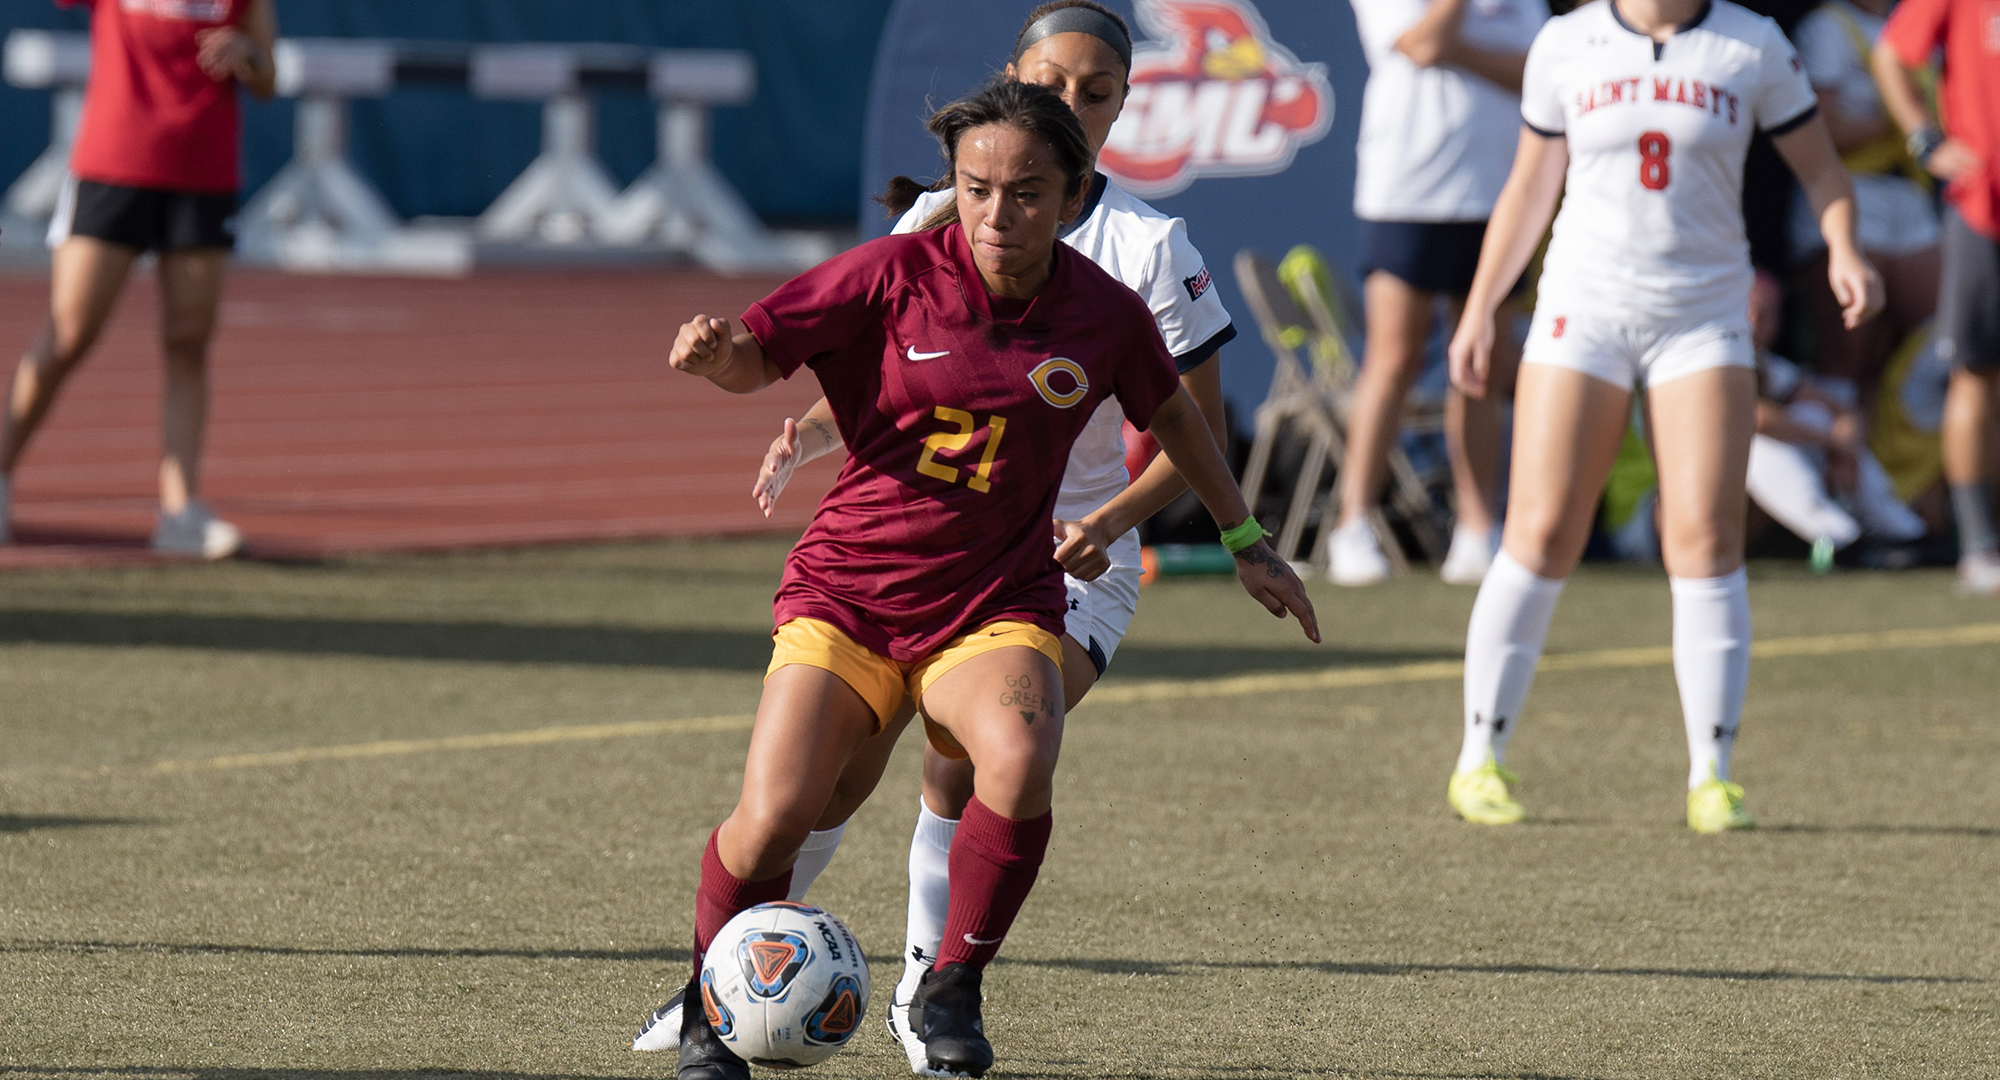 Freshman Alex Araiza controls the ball during the first half of the Cobbers' game at St. Mary's. (Photo courtesy of SMU Sports Information)